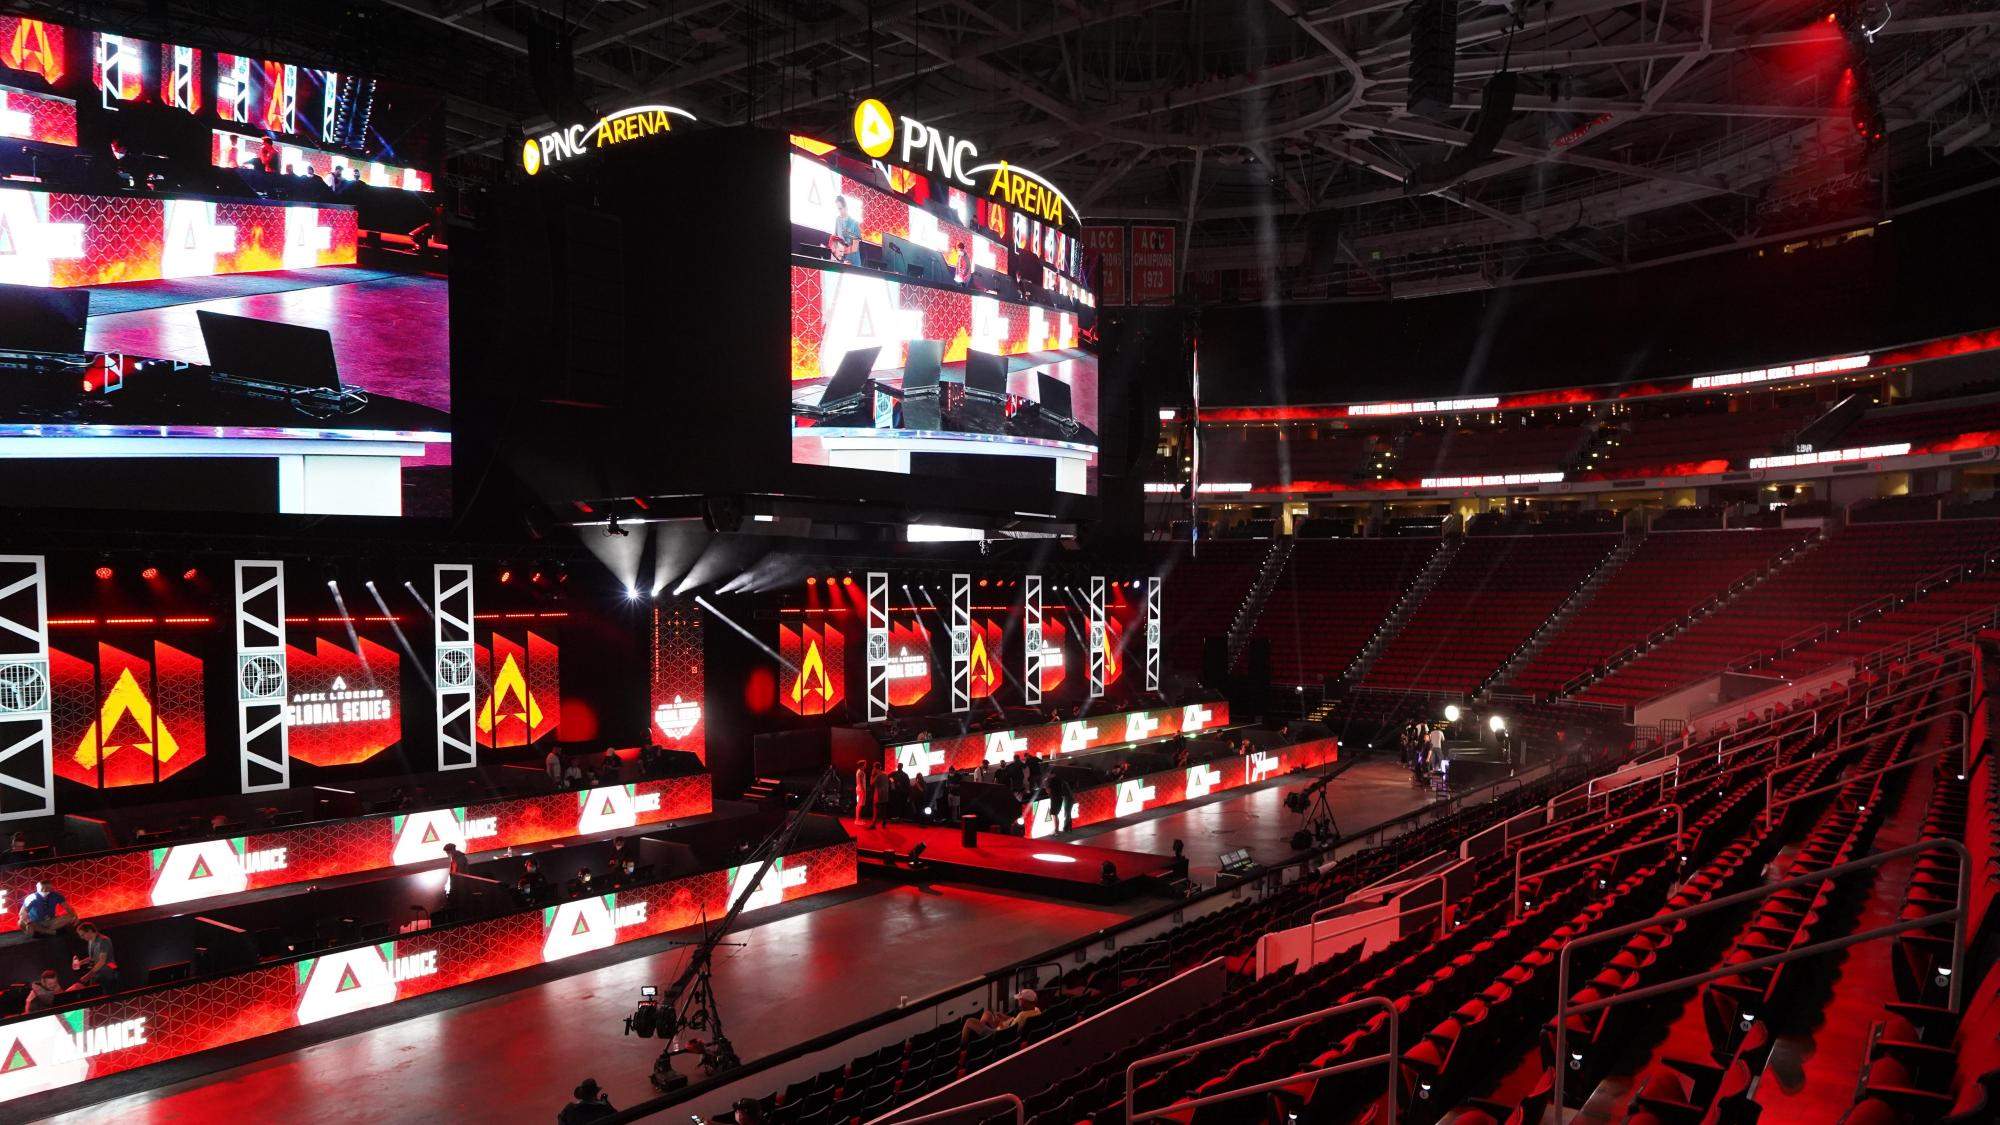 8-captivating-facts-about-pnc-arena